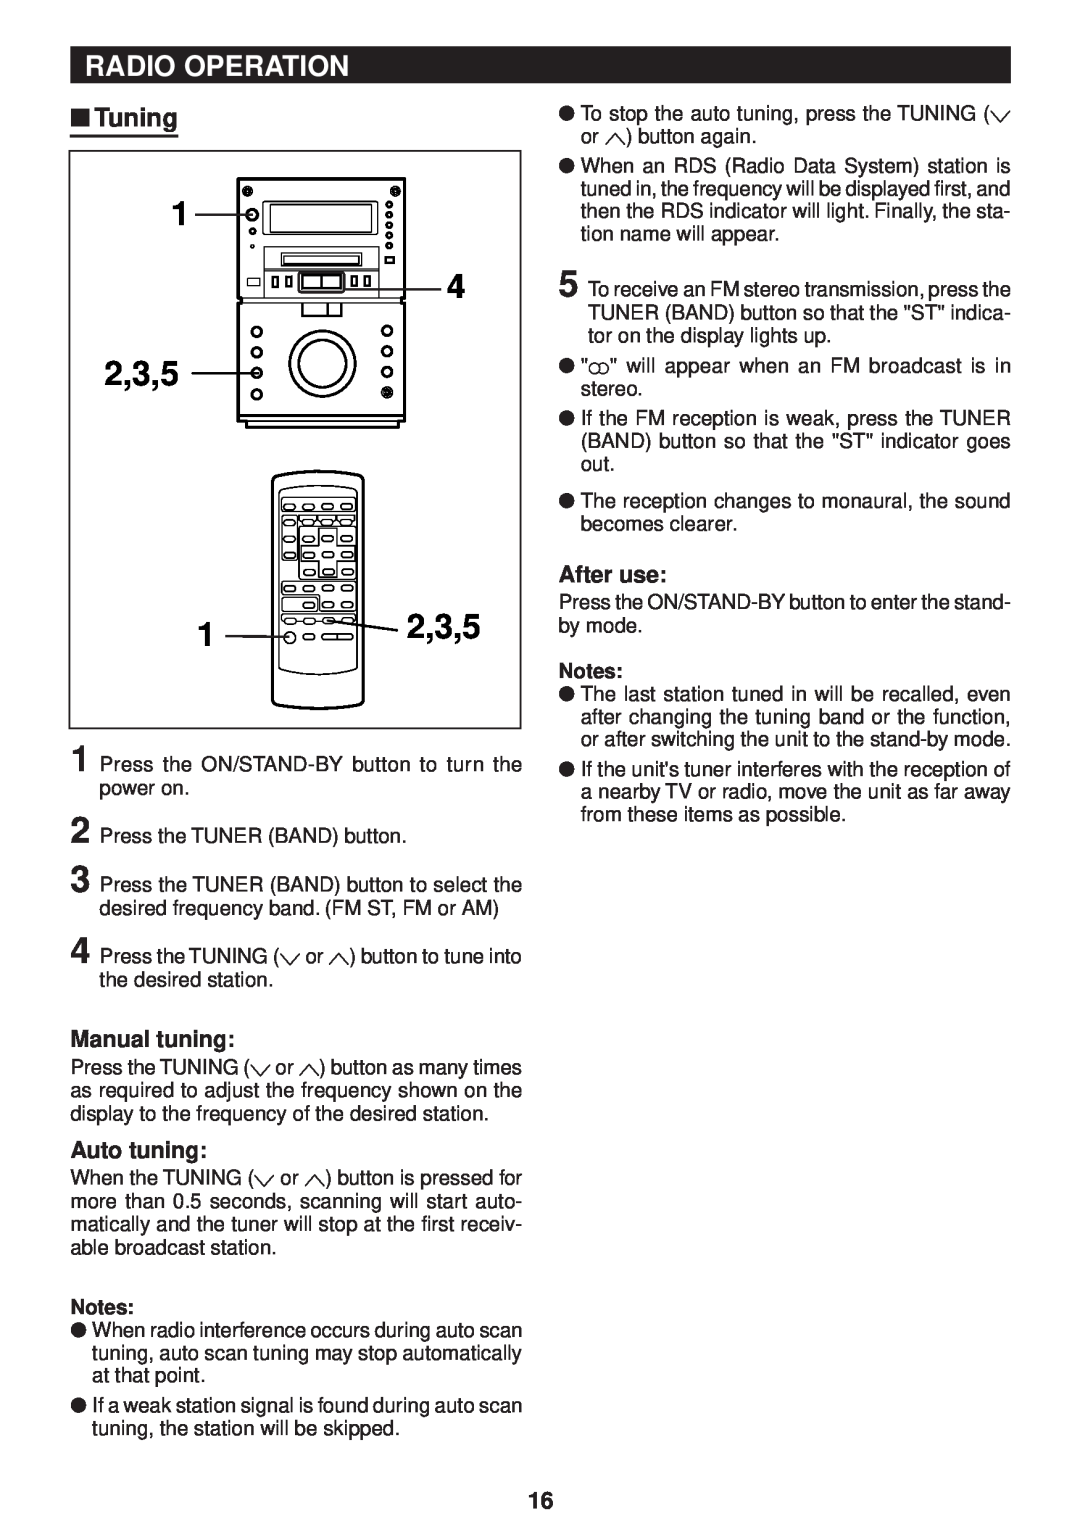 Sharp MD-M3H operation manual 2,3,5 1 2,3,5, Radio Operation, Tuning, Manual tuning, Auto tuning, After use 